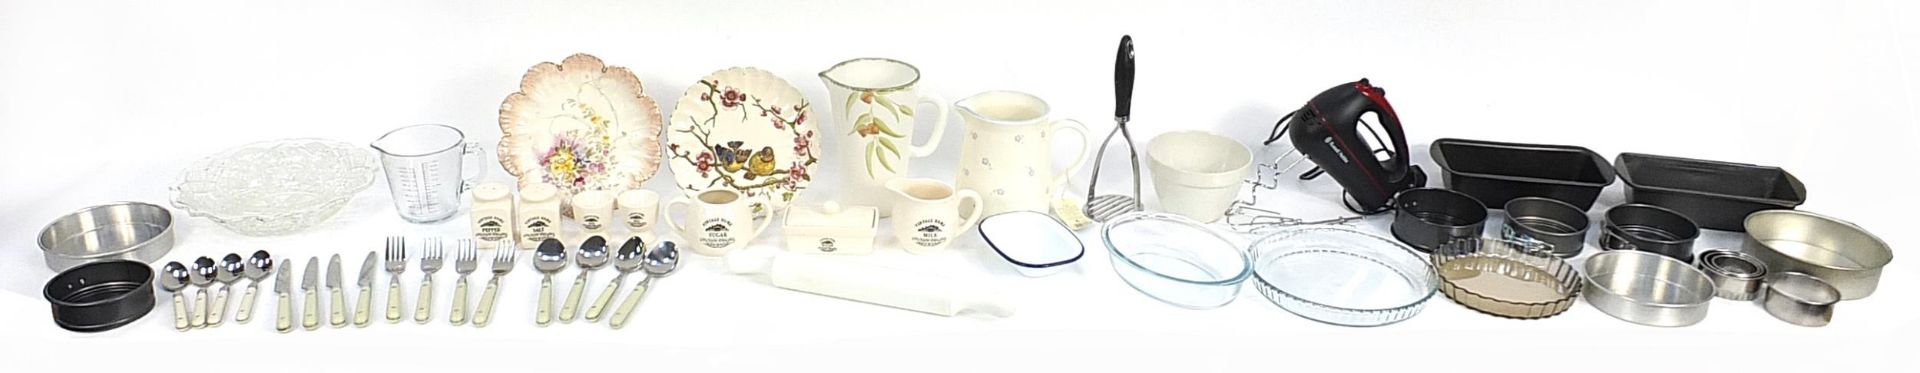 Assorted kitchen and baking items including , ceramic jugs, pudding basins, glass cake flans tin and